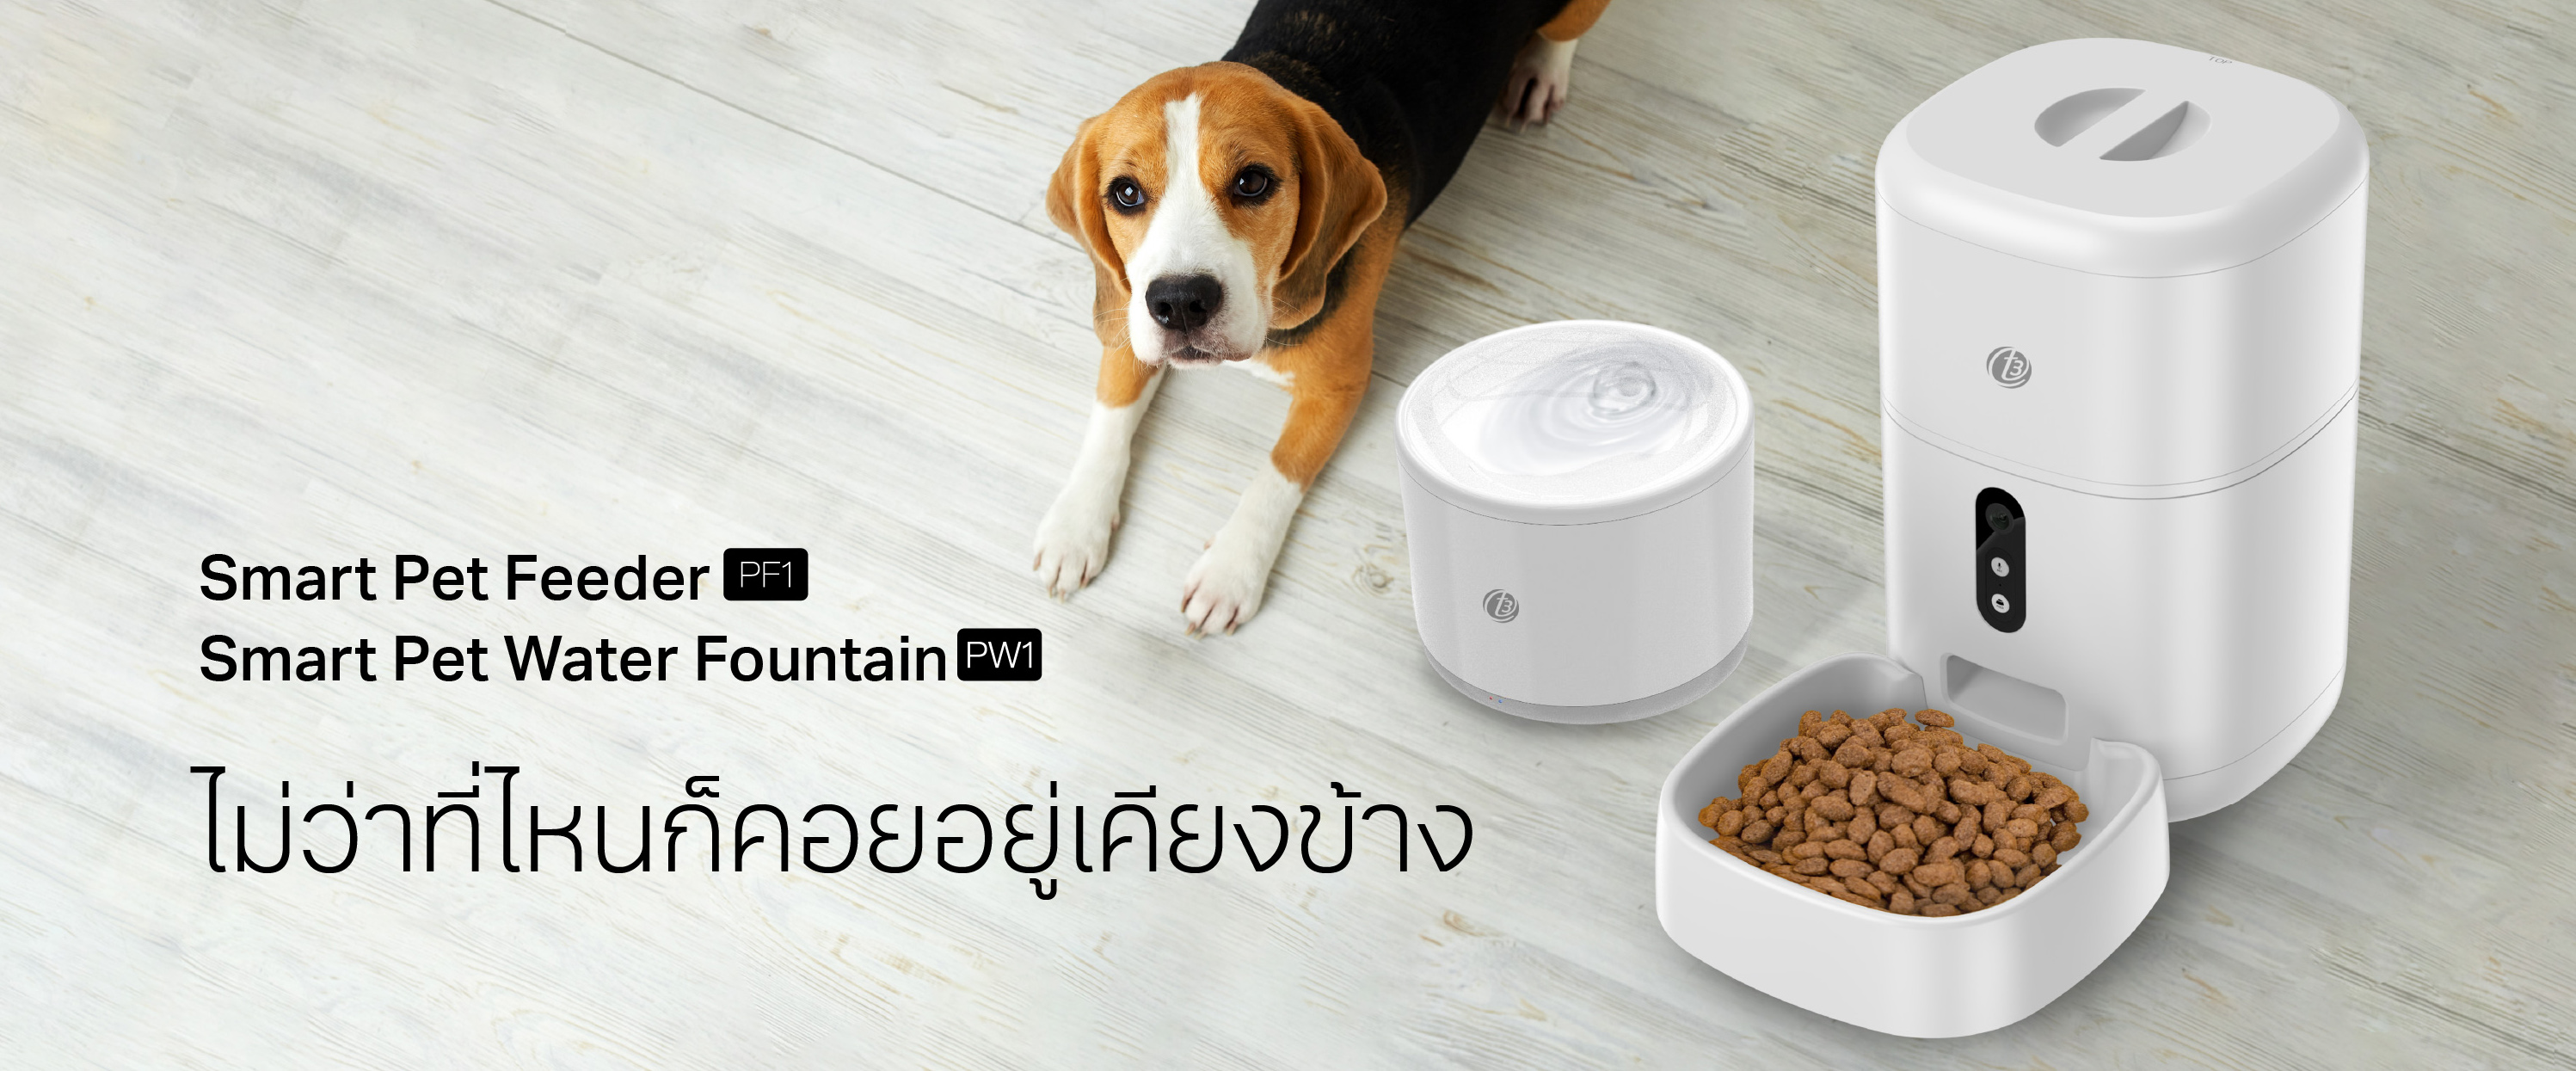 T3 Smart Pet Feeder PF1 and Pet Water Fountain PW1